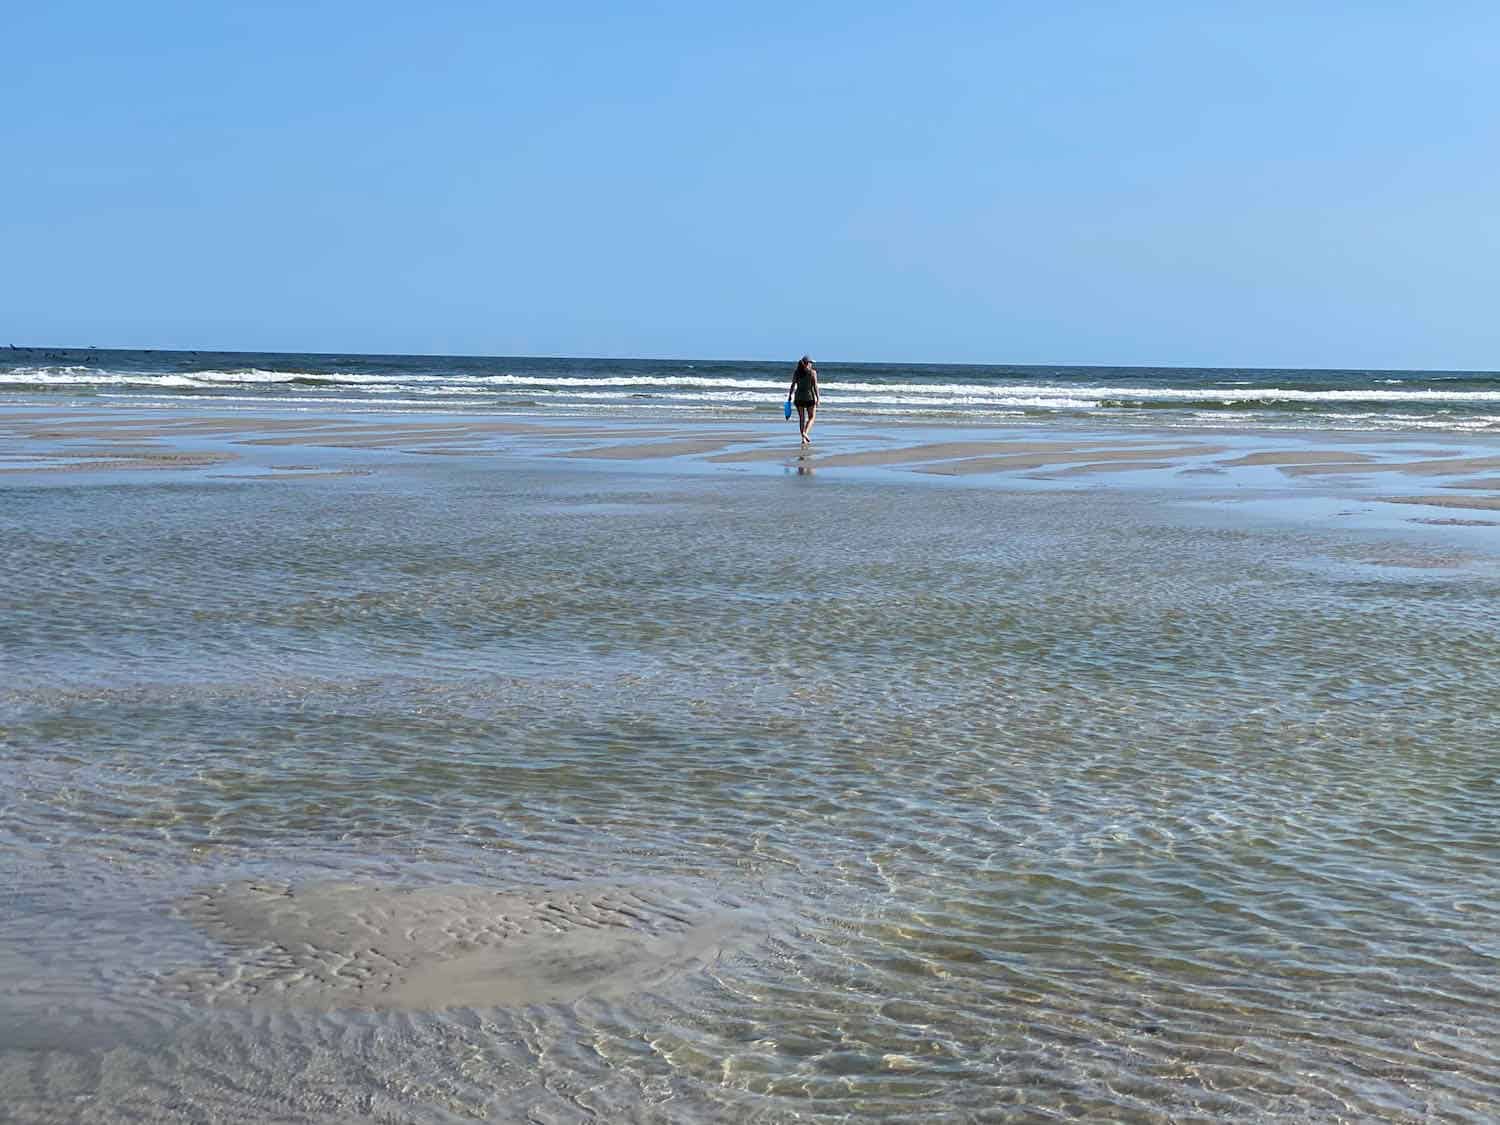 One person walking on an empty beach in Onslow County, NC.